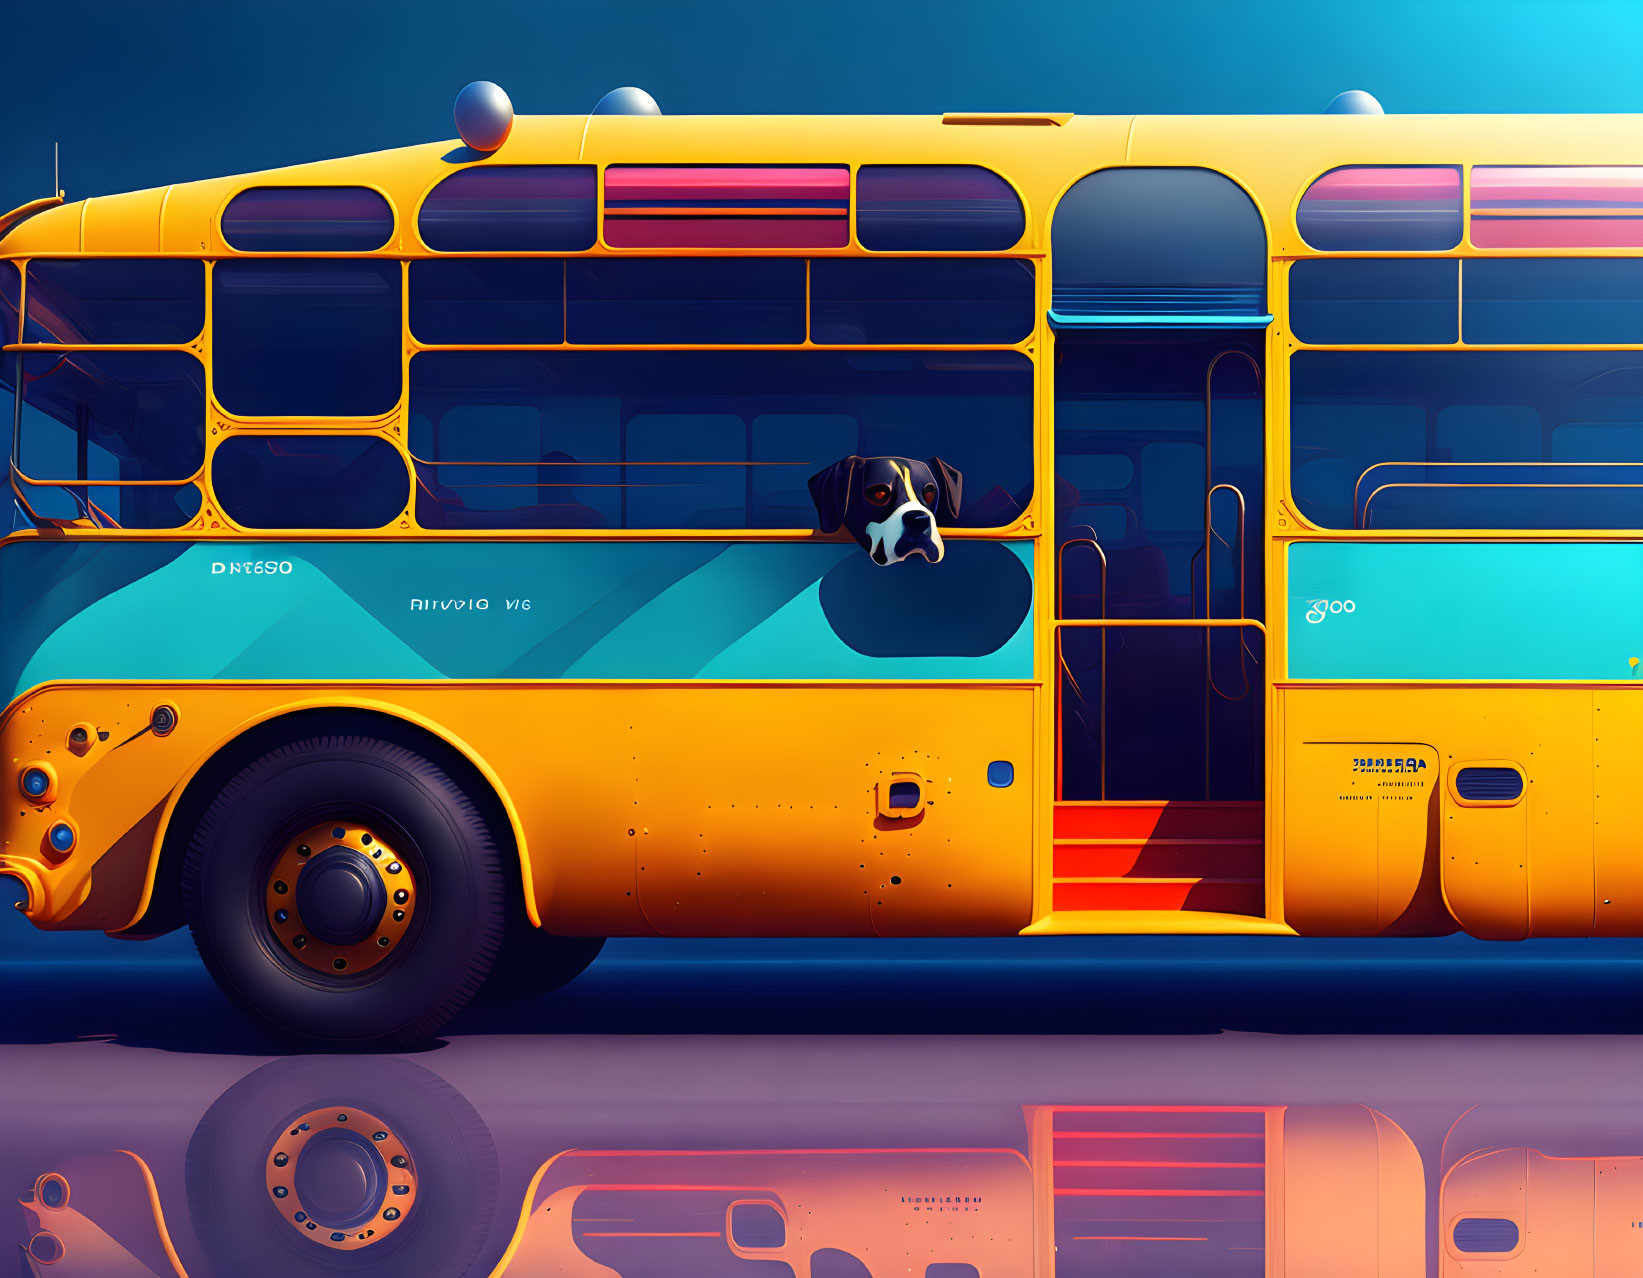 Vibrant illustration of yellow and blue school bus with dog peeking out window